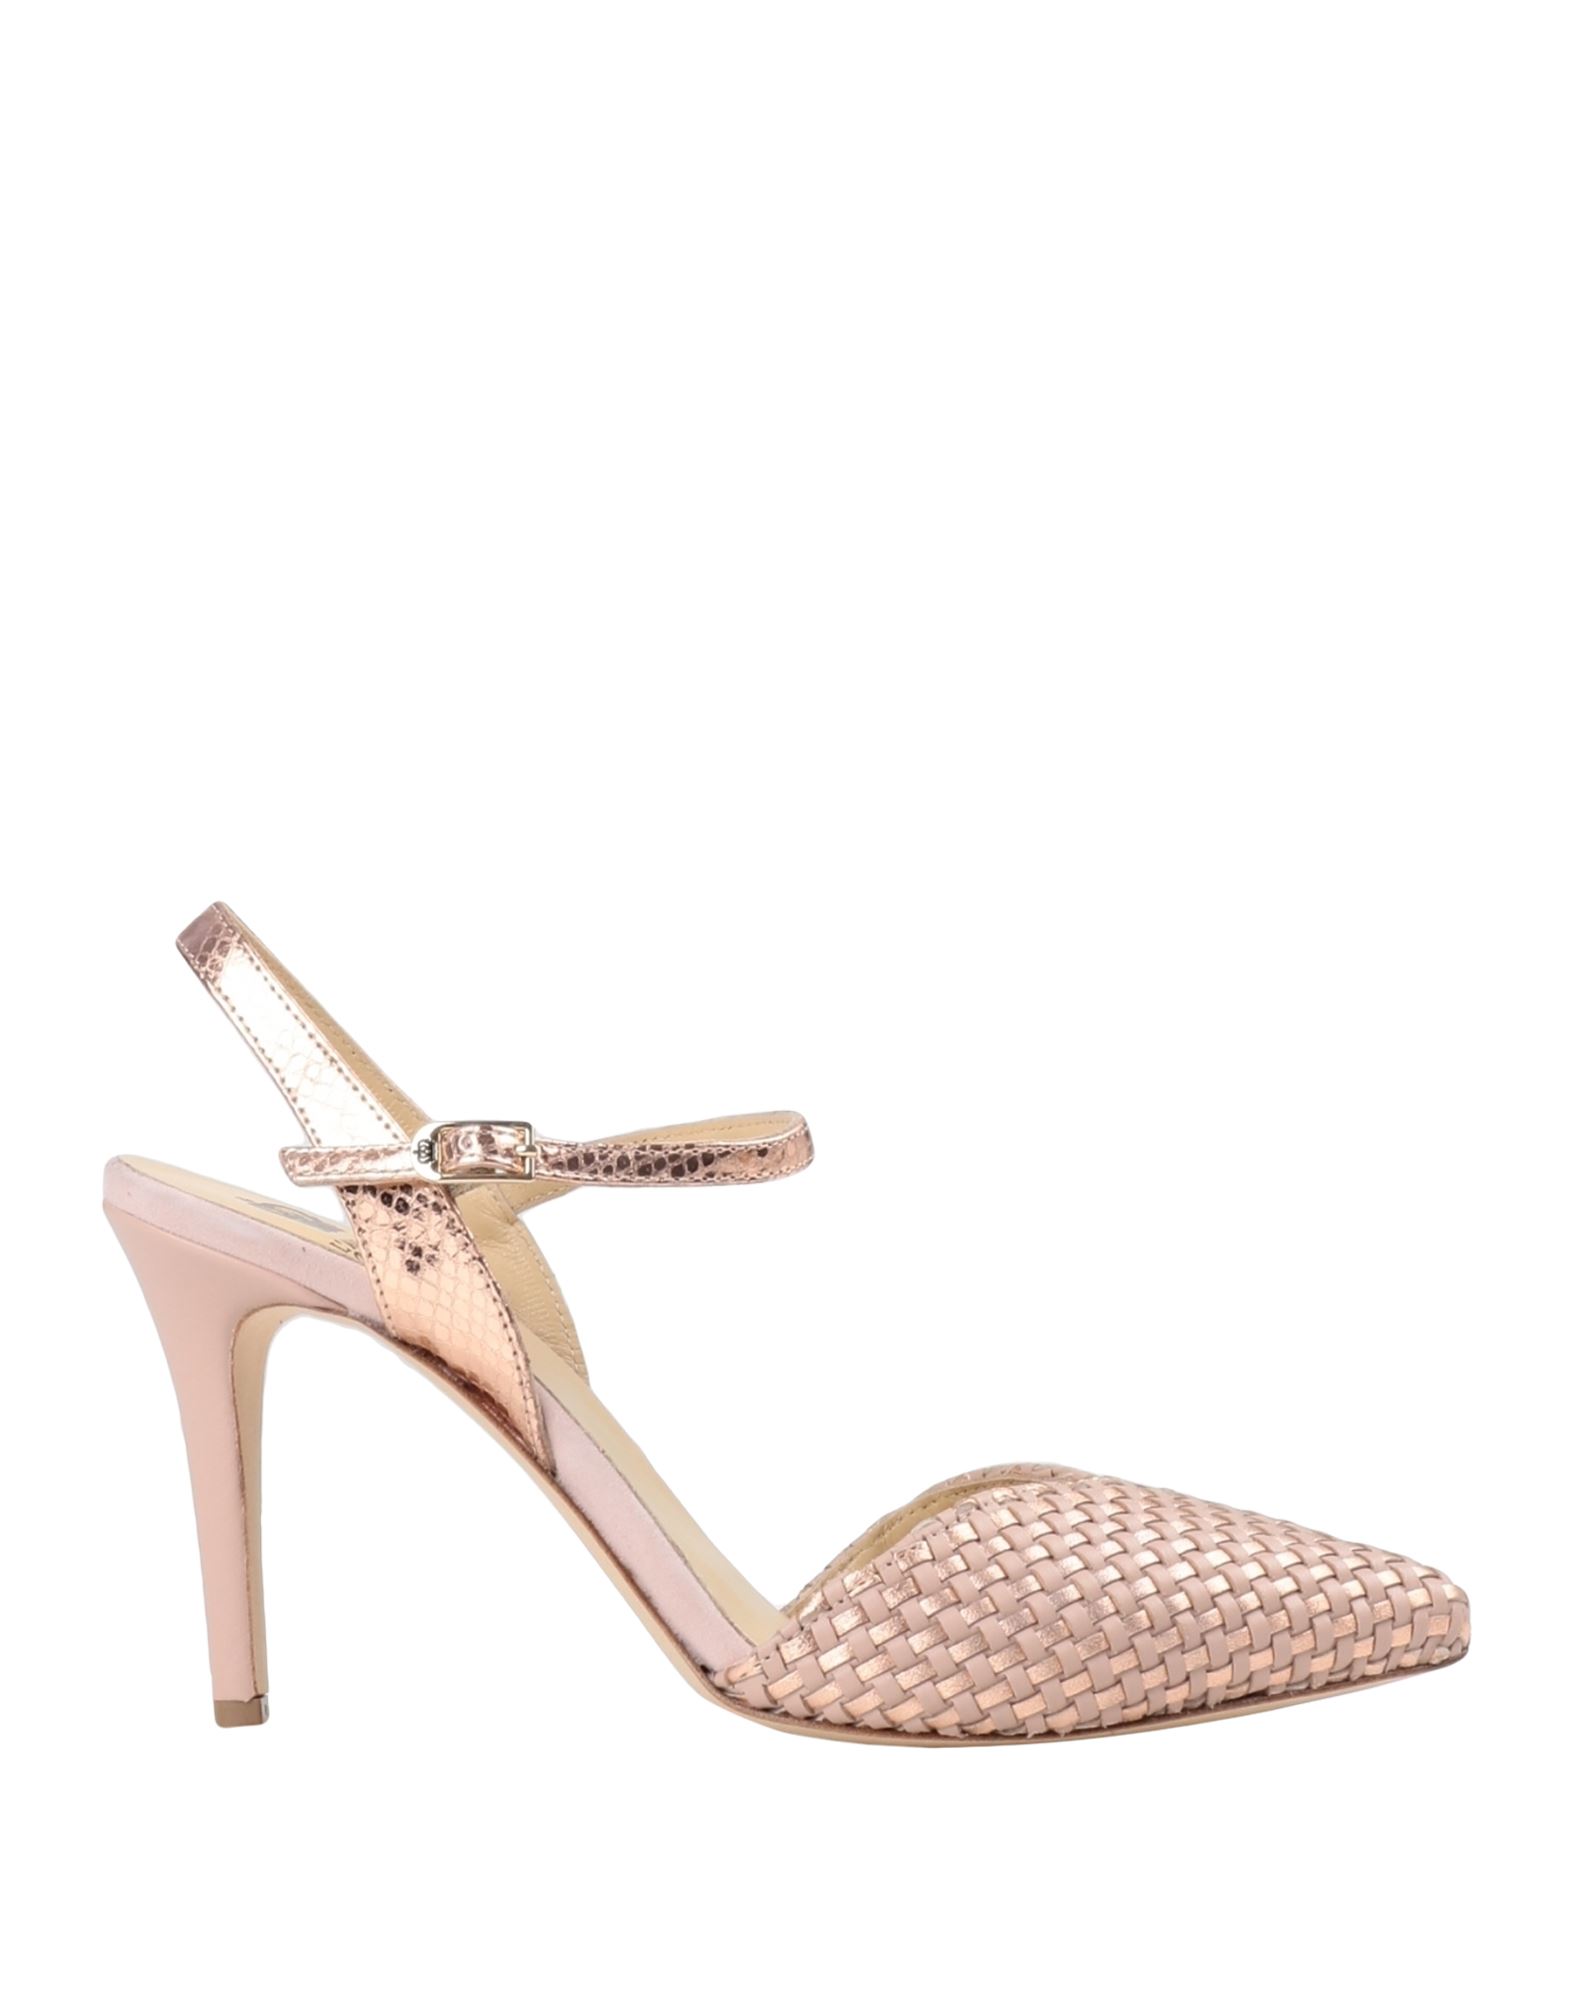 L'arianna Woman Pumps Rose Gold Size 8 Soft Leather